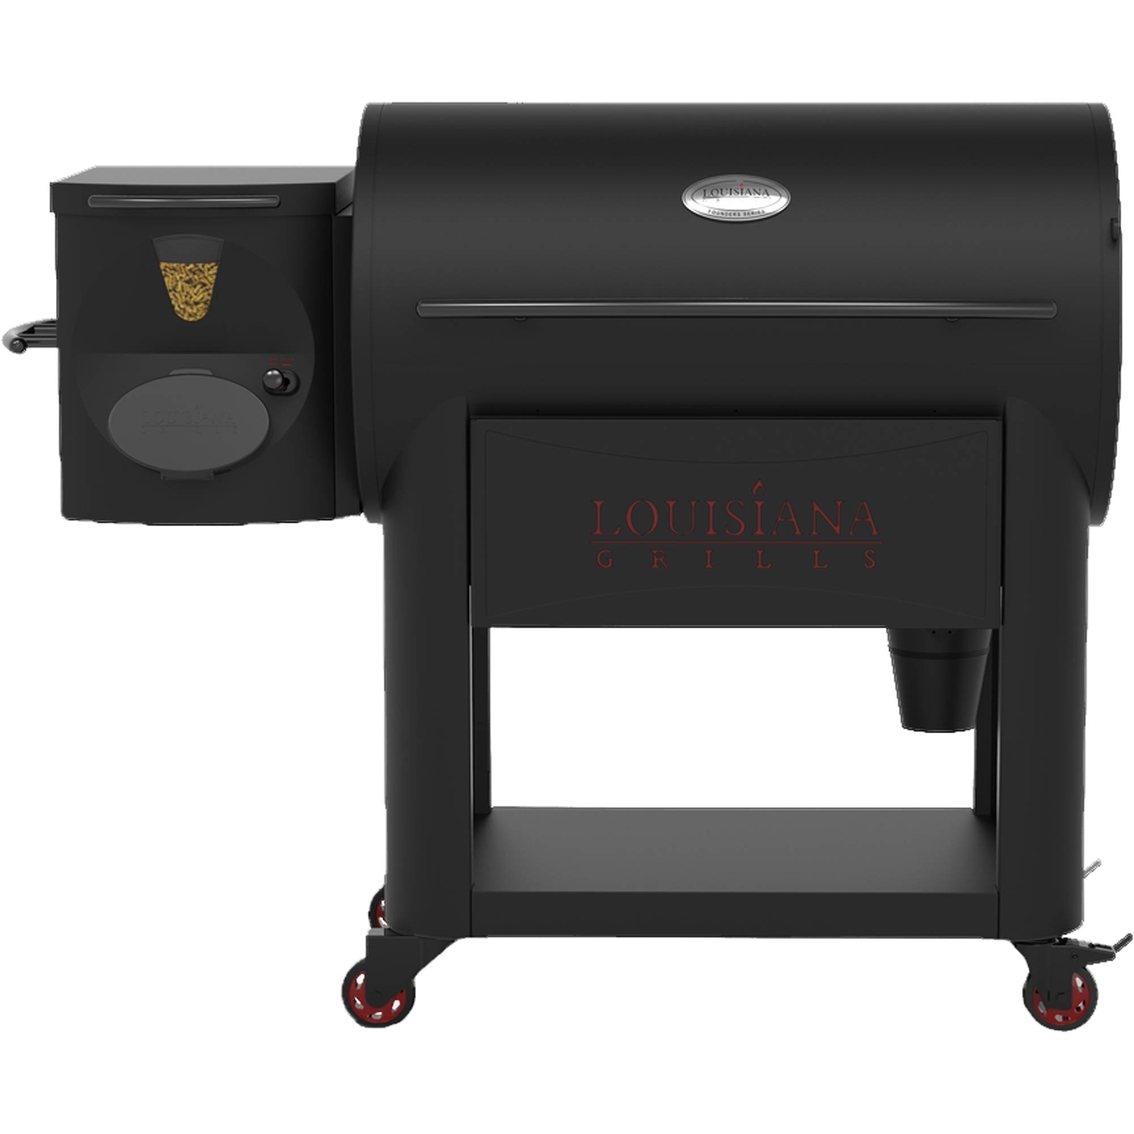 Louisiana Grills Founders Series Premier 1200 Grill